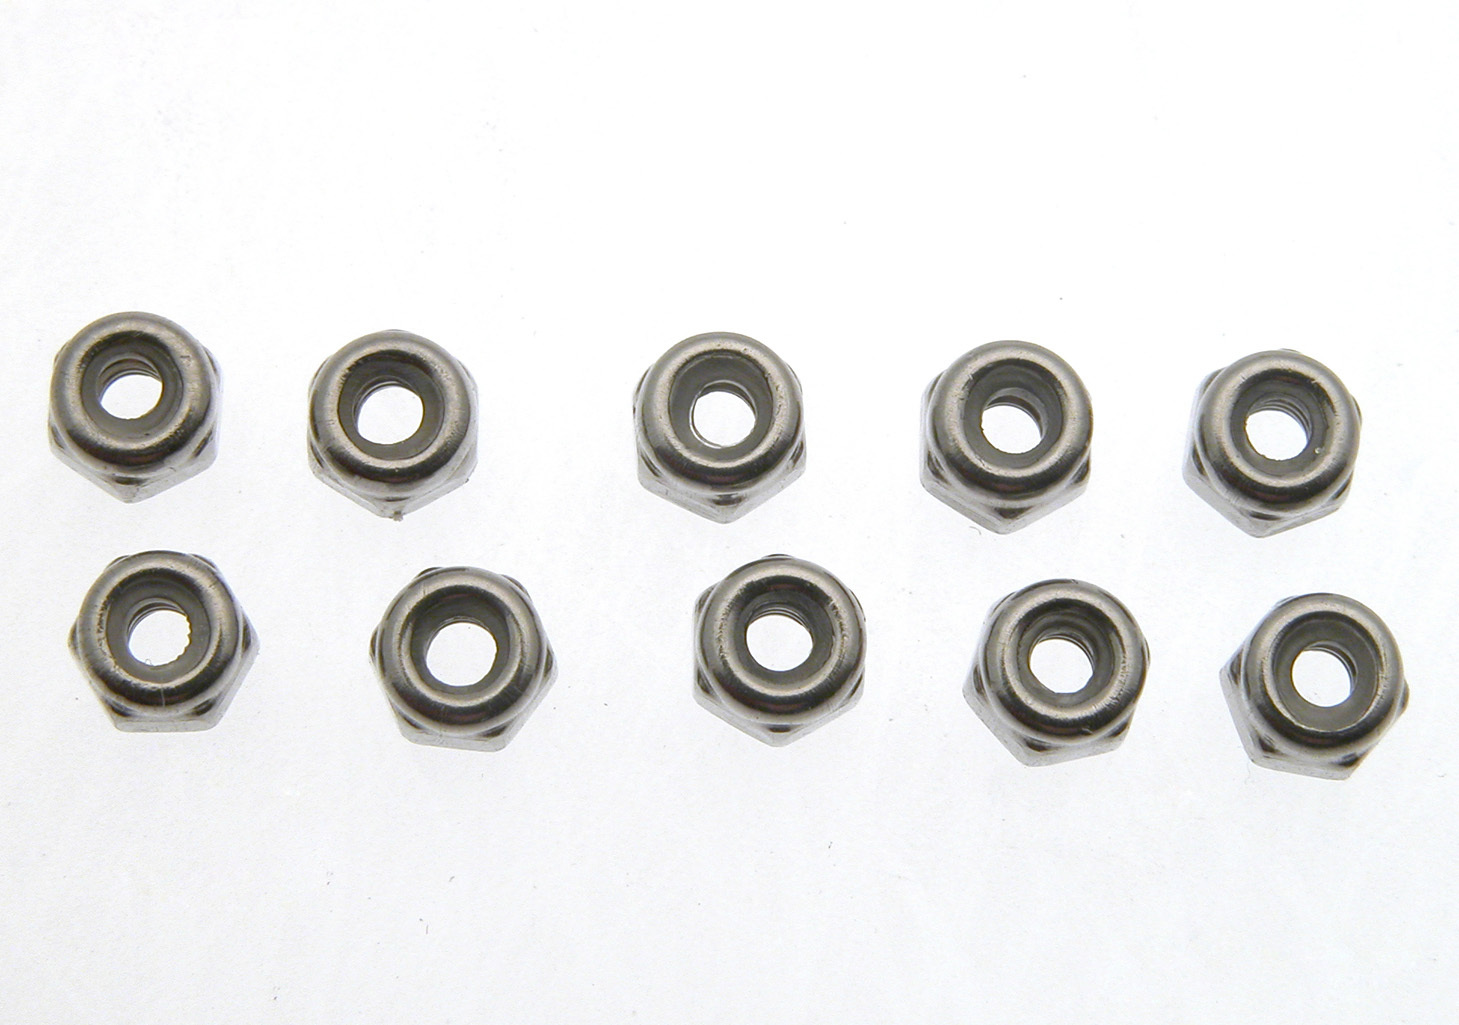 SC-5118 Steel M2 Self blocking nuts with 4mm nut.